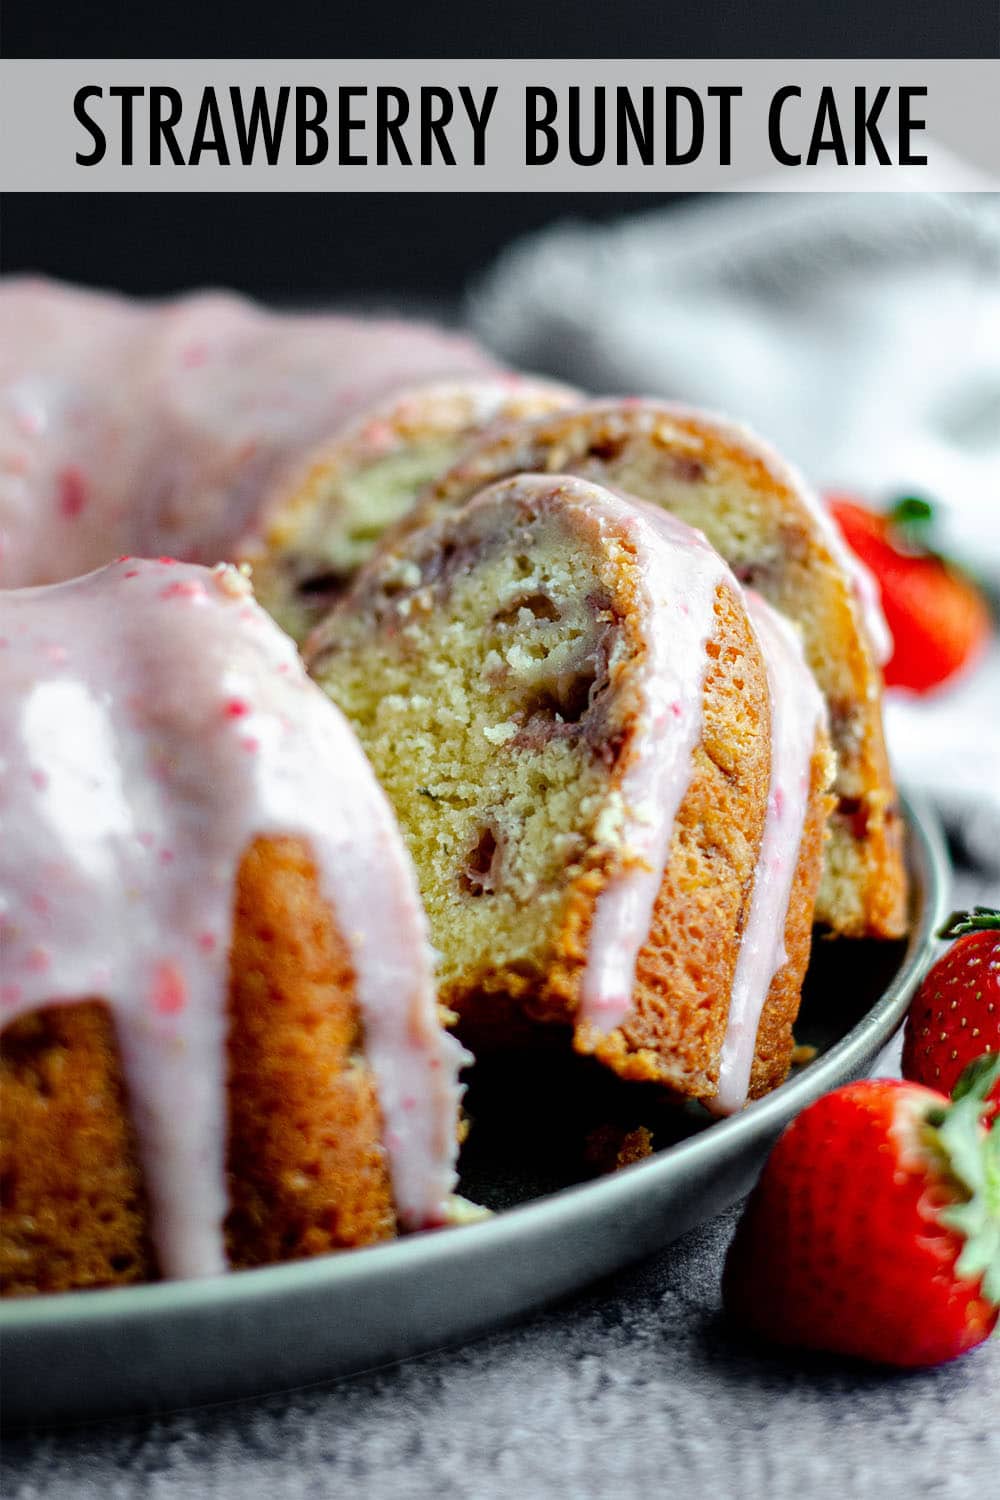 Homemade strawberry bundt cake made from scratch with fresh strawberries and topped with strawberry white chocolate ganache. via @frshaprilflours